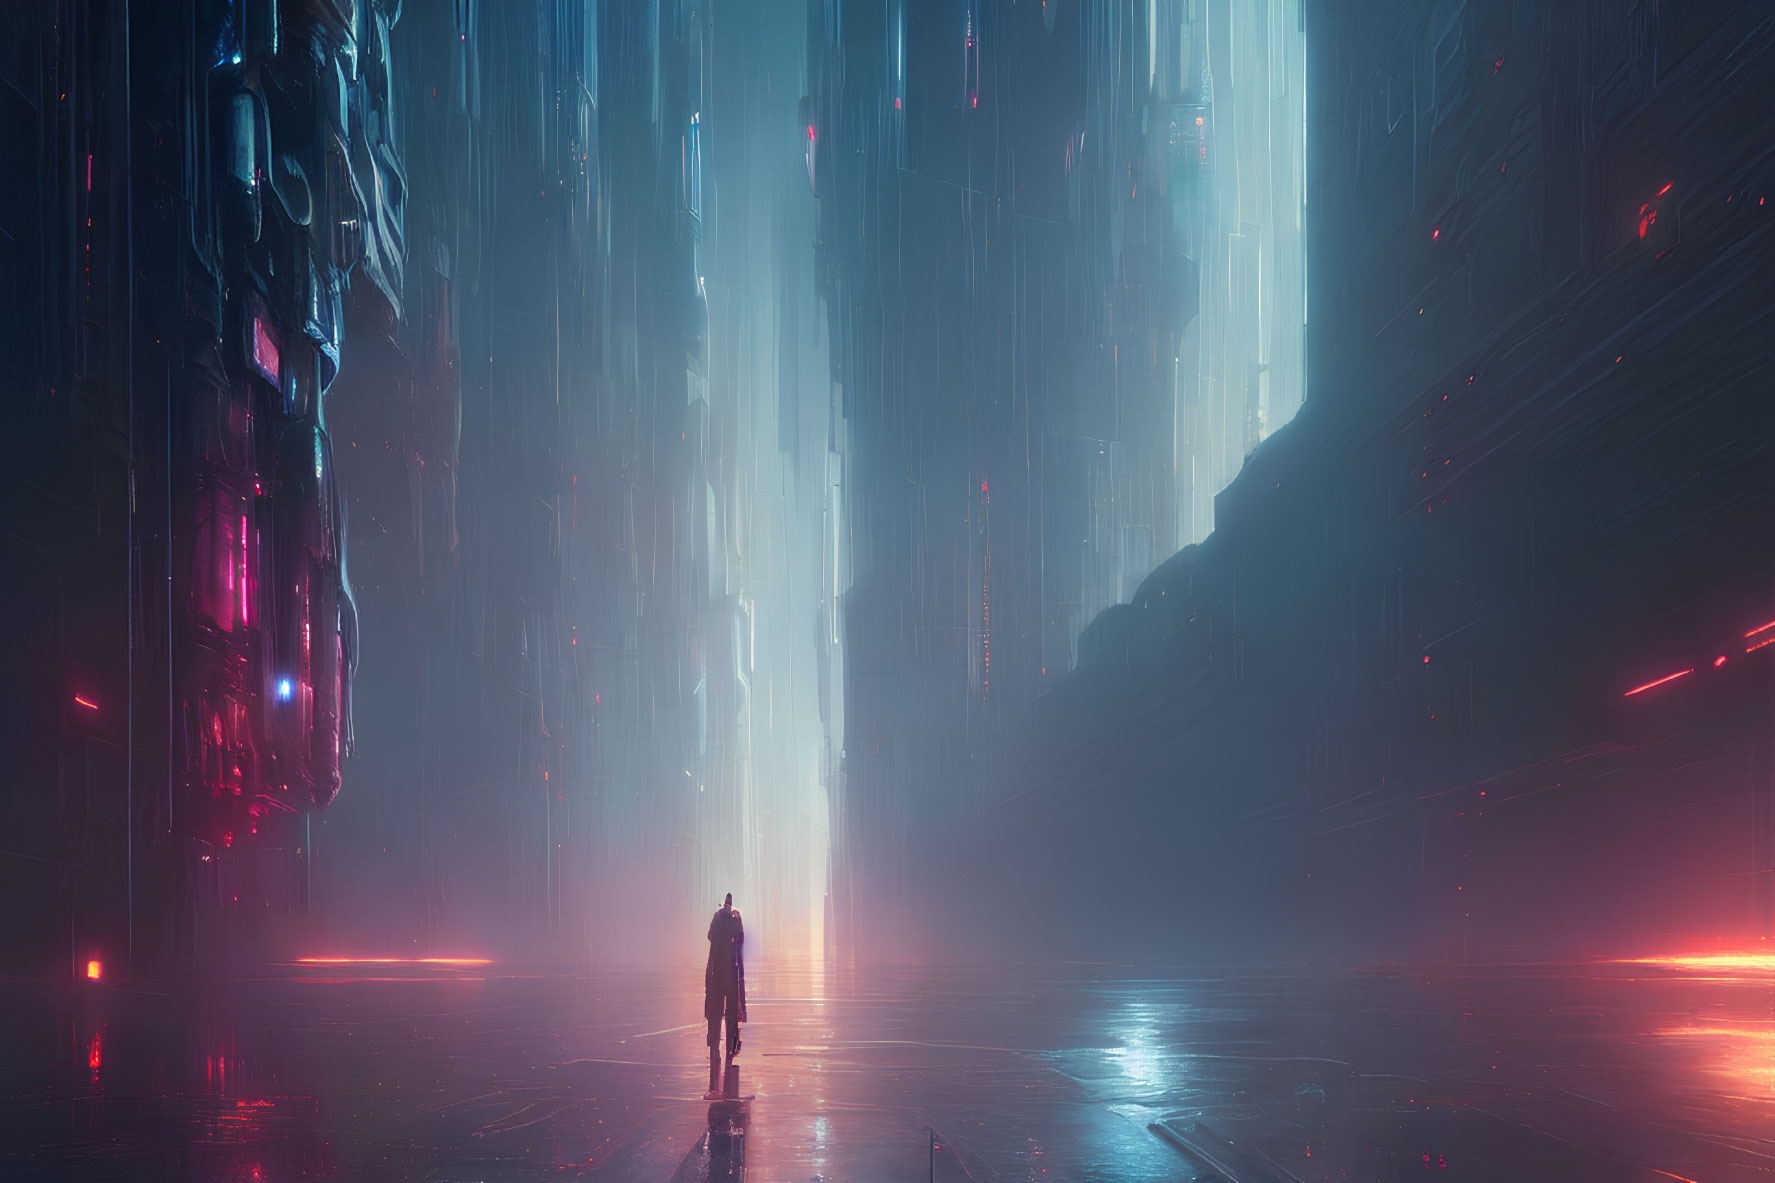 Solitary figure in futuristic cityscape with illuminated structures